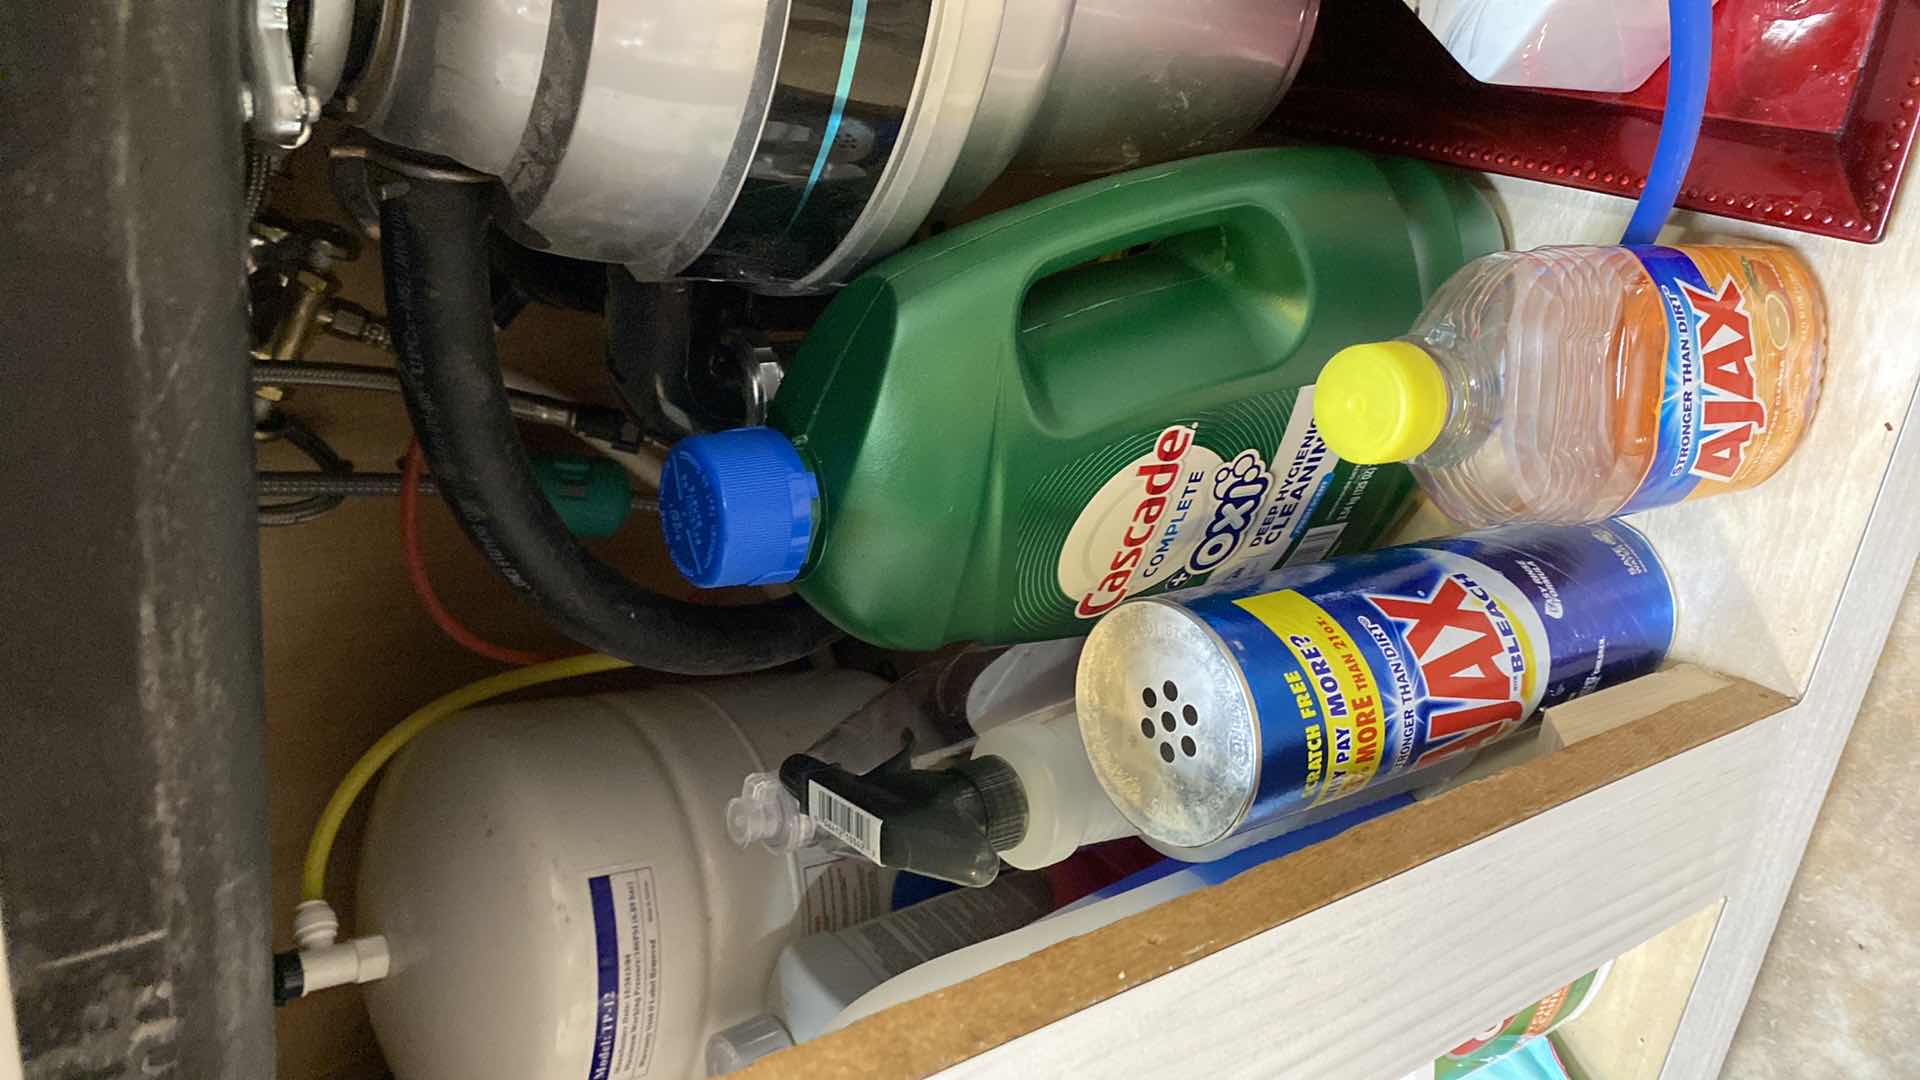 Photo 3 of CONTENTS OF CABINET CLEANING SUPPLIES